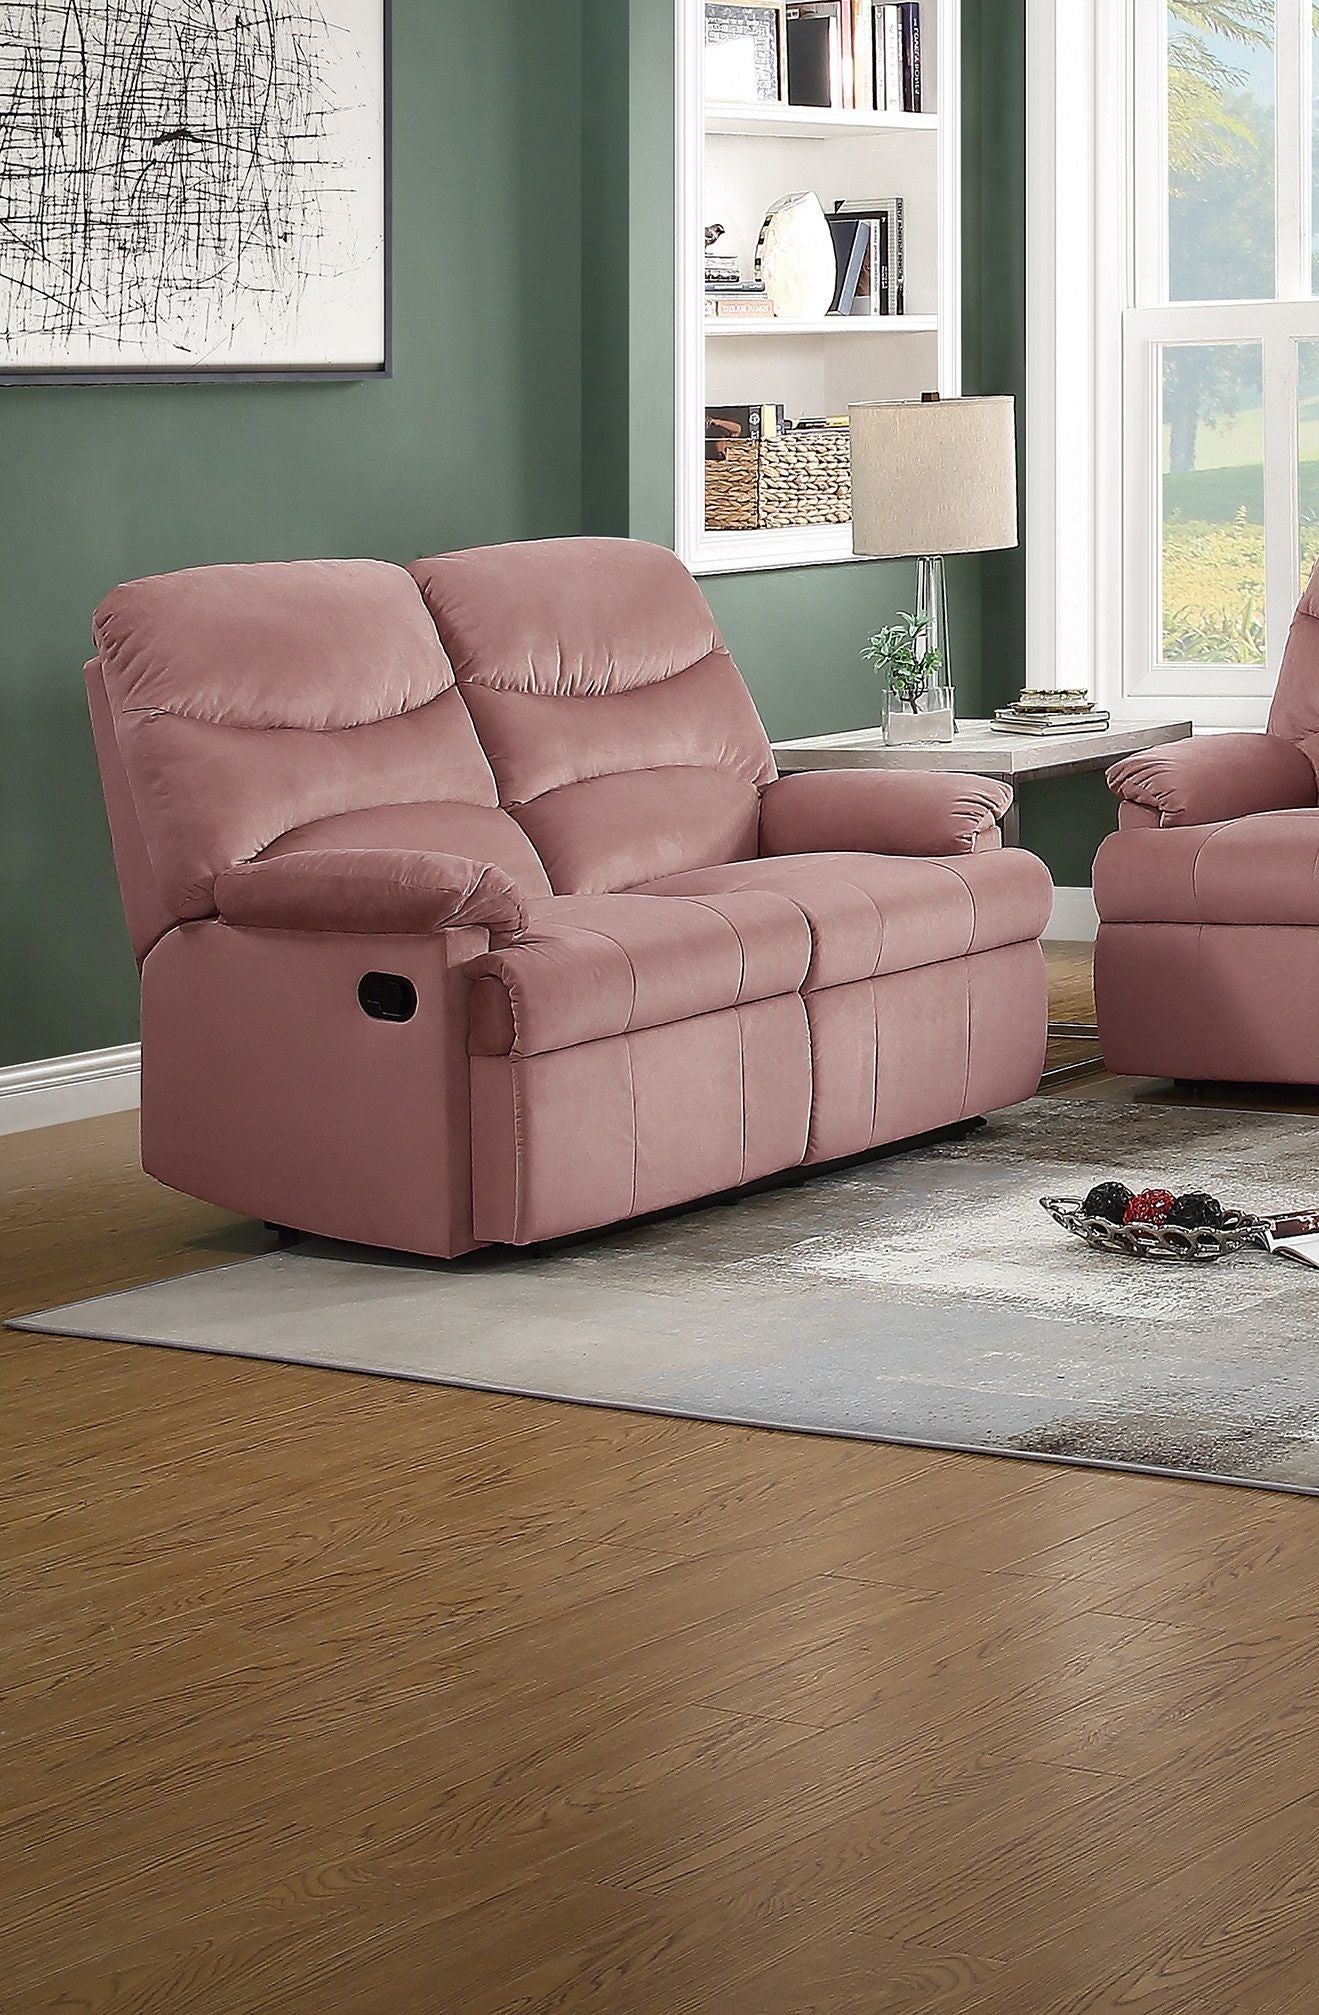 Luxurious Velvet Blush Pink Color 2 Seater Manual Recliner Loveseat Couch Manual Motion Plush Armrest Living Room Furniture Loveseat Couch